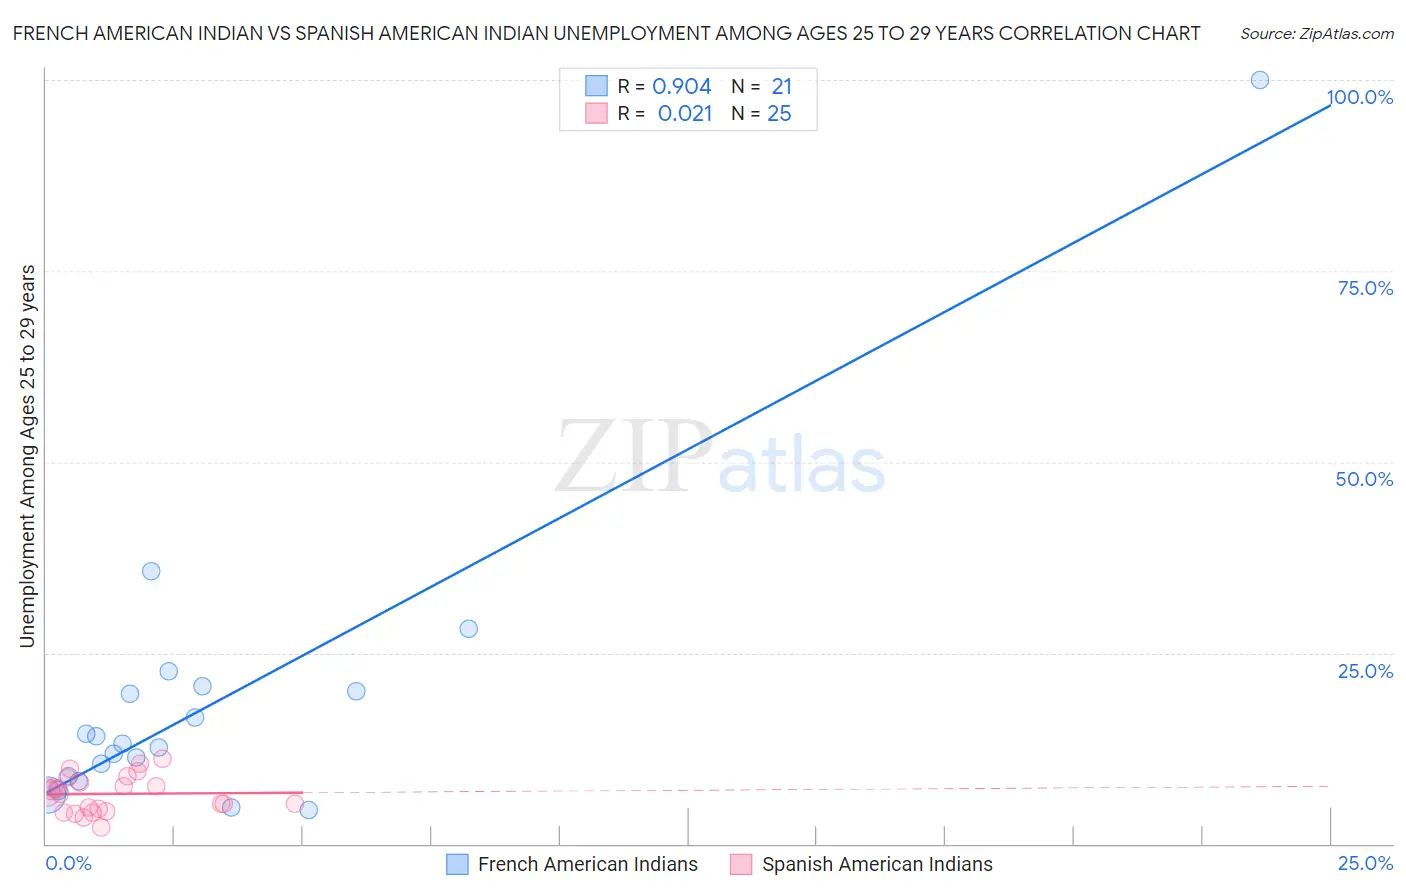 French American Indian vs Spanish American Indian Unemployment Among Ages 25 to 29 years